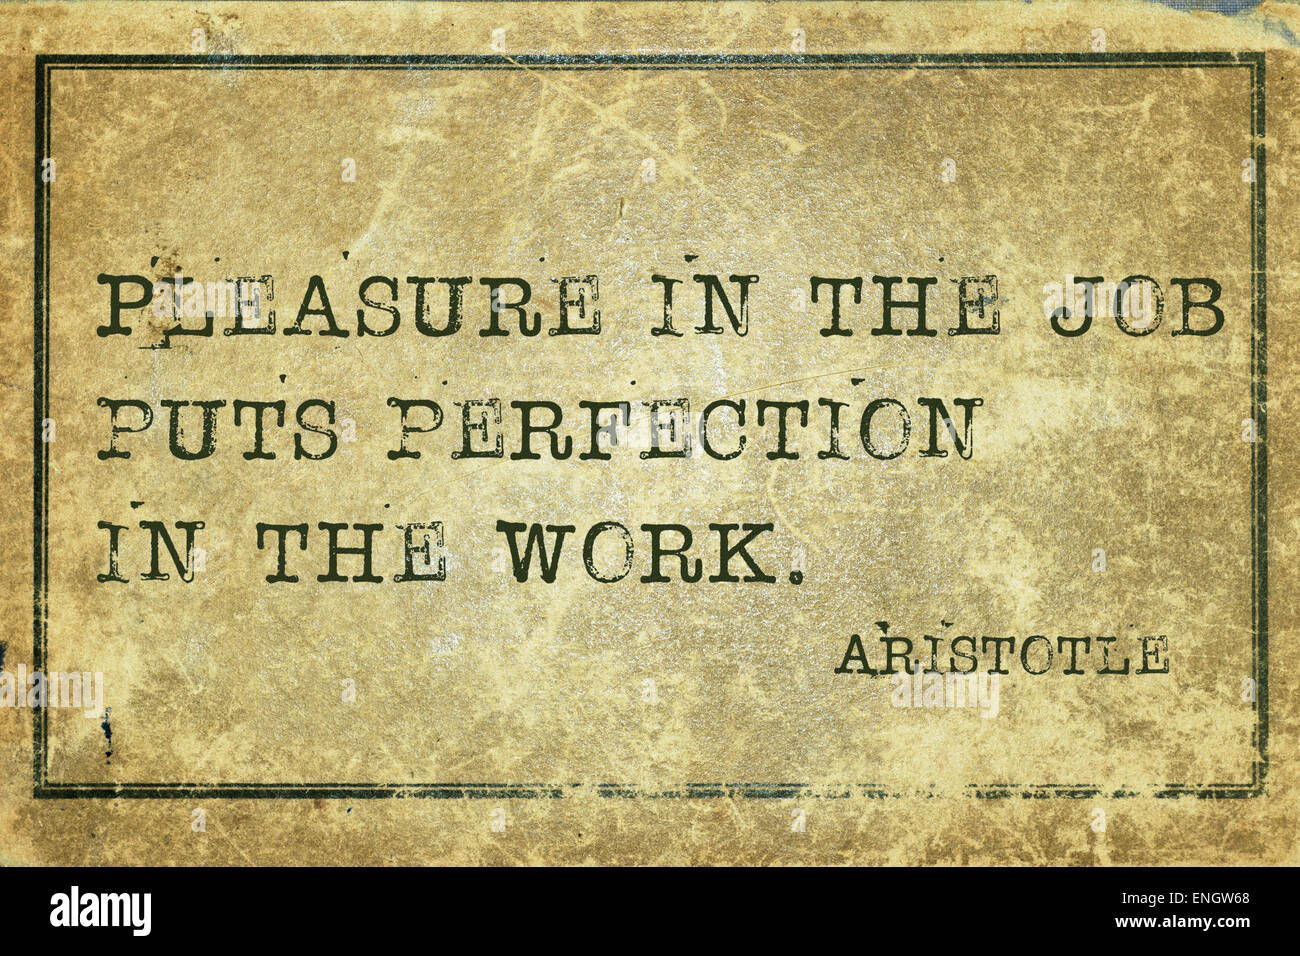 Pleasure in the job puts perfection - ancient Greek philosopher Aristotle quote printed on grunge vintage cardboard Stock Photo